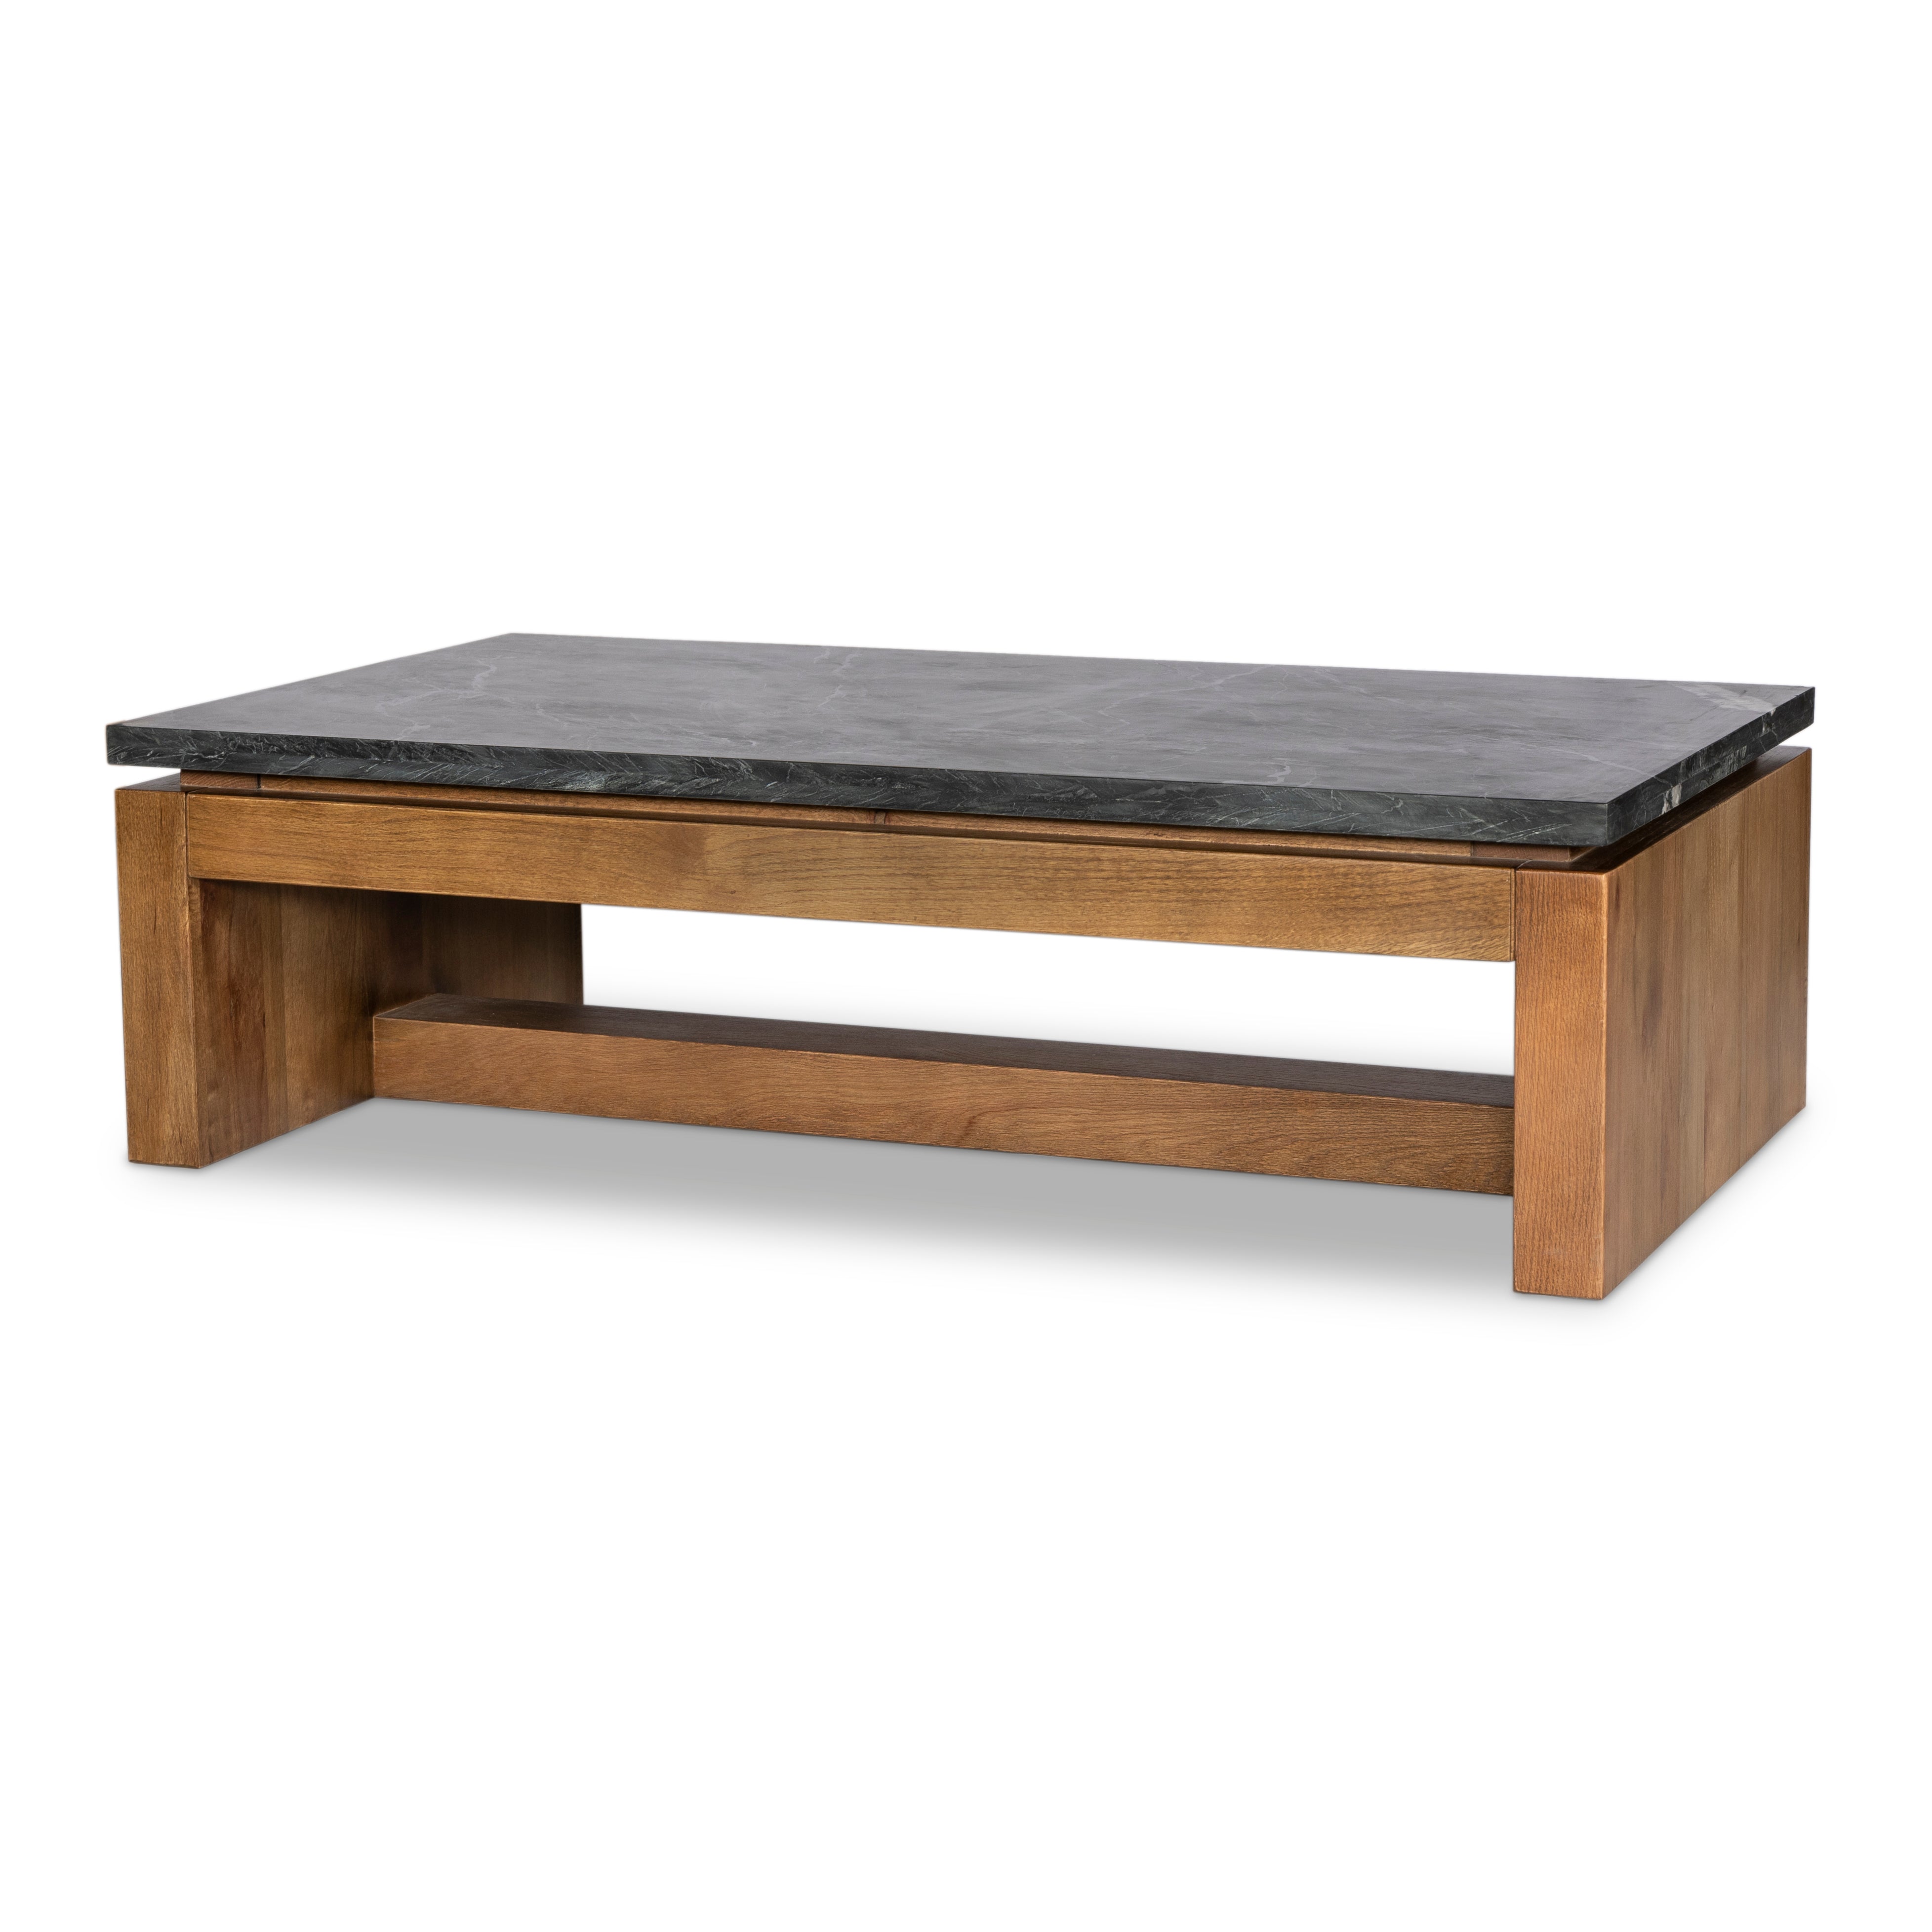 Mixed materials update this waterfall-style coffee table, as a warm oak base pairs with a sleek black marble tabletop. Amethyst Home provides interior design, new construction, custom furniture, and area rugs in the Alpharetta metro area.